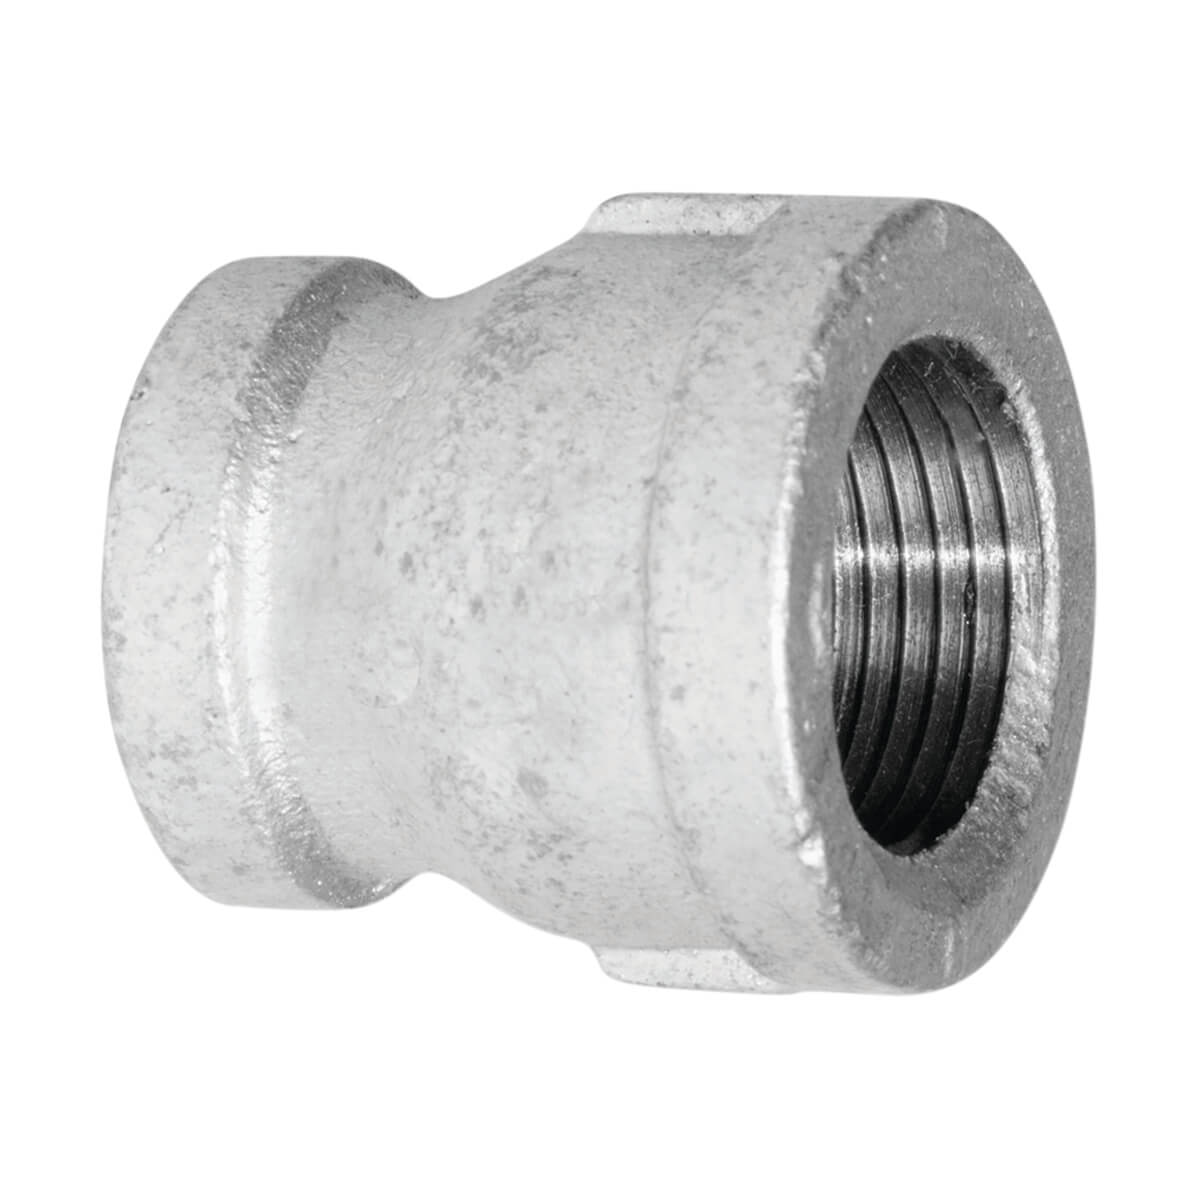 Fitting Galvanized Iron Coupling - 1-in x 3/8-in